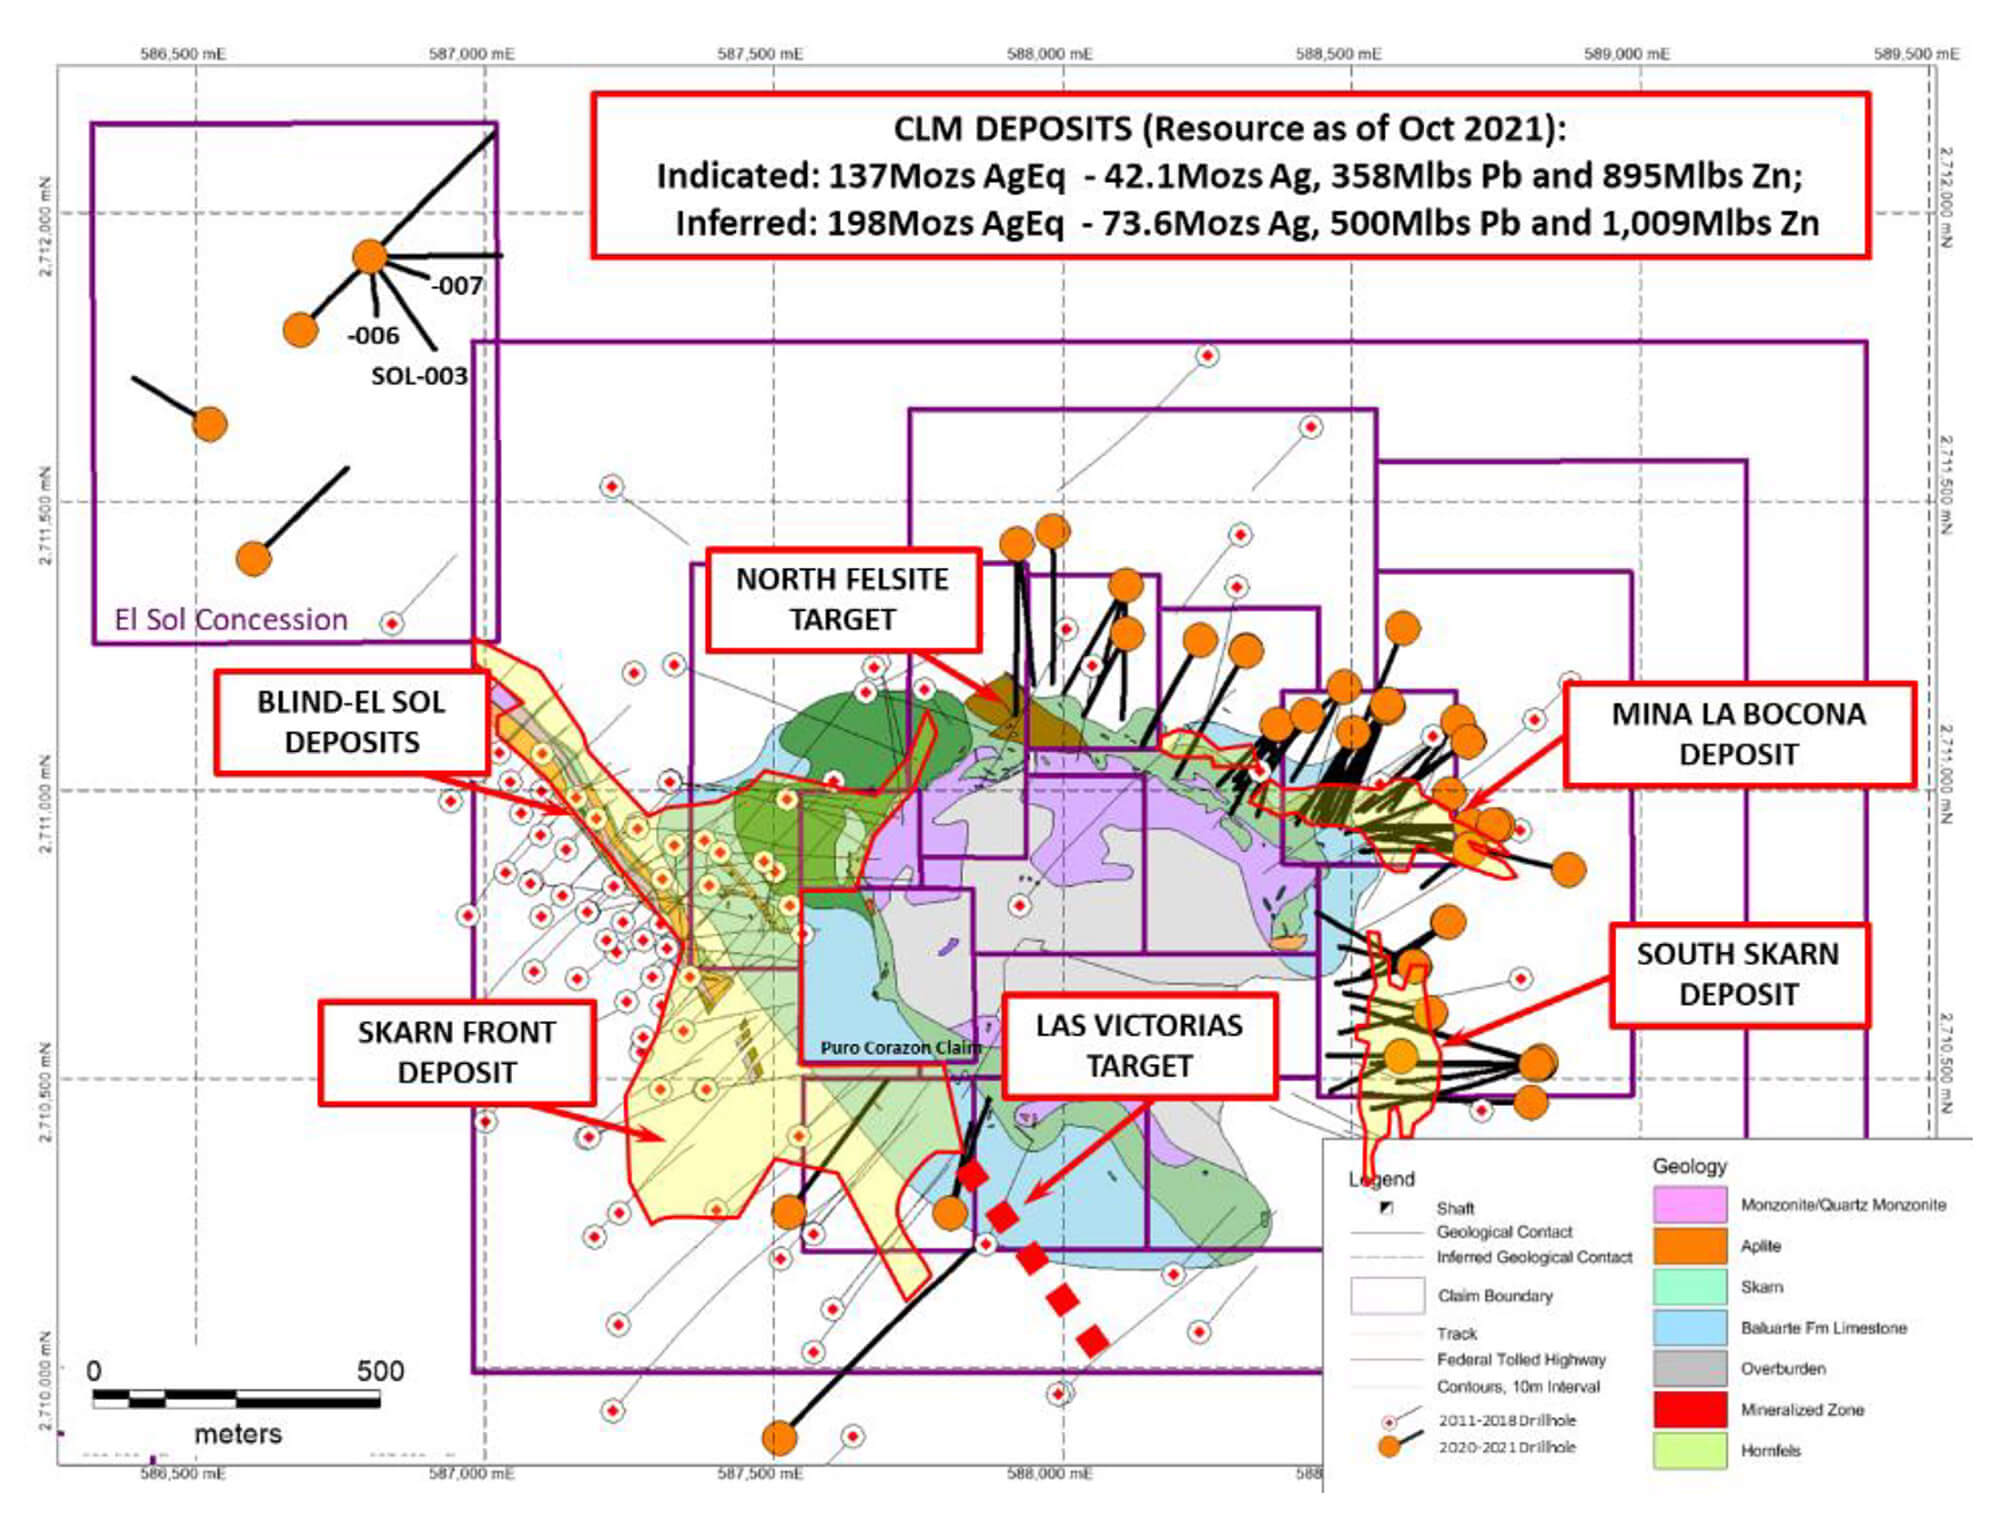 Plan Map of the Area of the Cerro showing the distribution of the CLM deposits and the location for new drilling, at the North Felsite target and El Sol concession